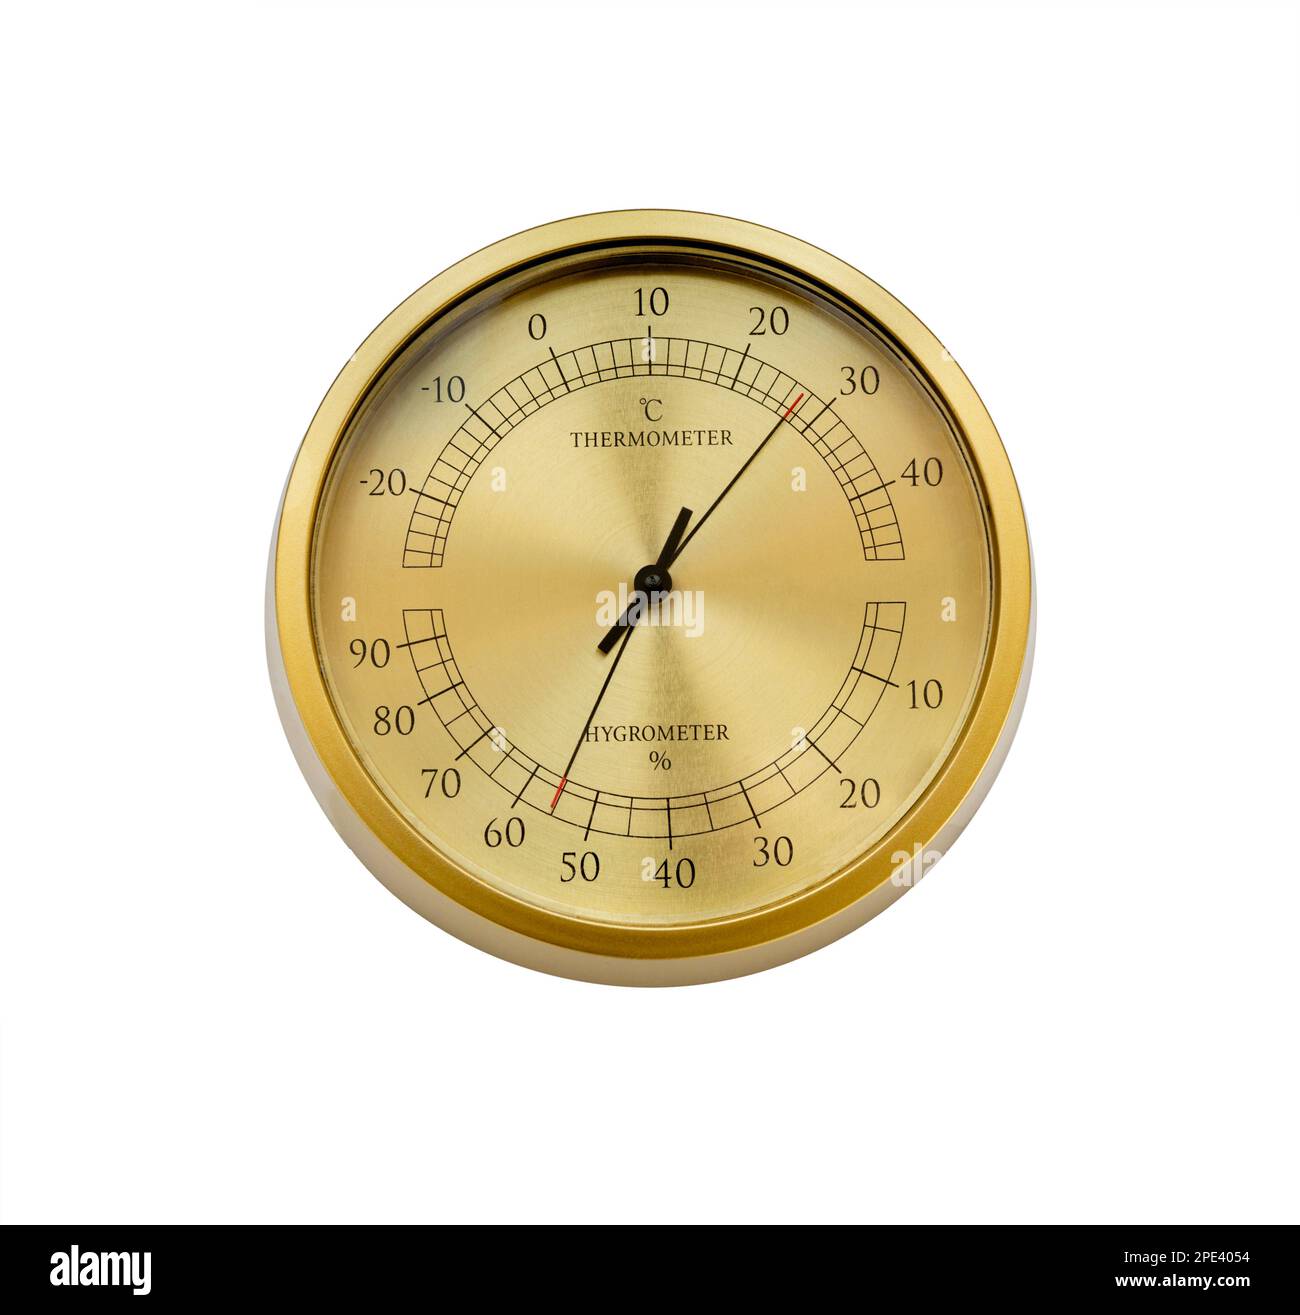 https://c8.alamy.com/comp/2PE4054/hygrometer-thermometer-isolated-on-a-white-background-instrument-for-measuring-relative-humidity-and-air-temperature-2PE4054.jpg